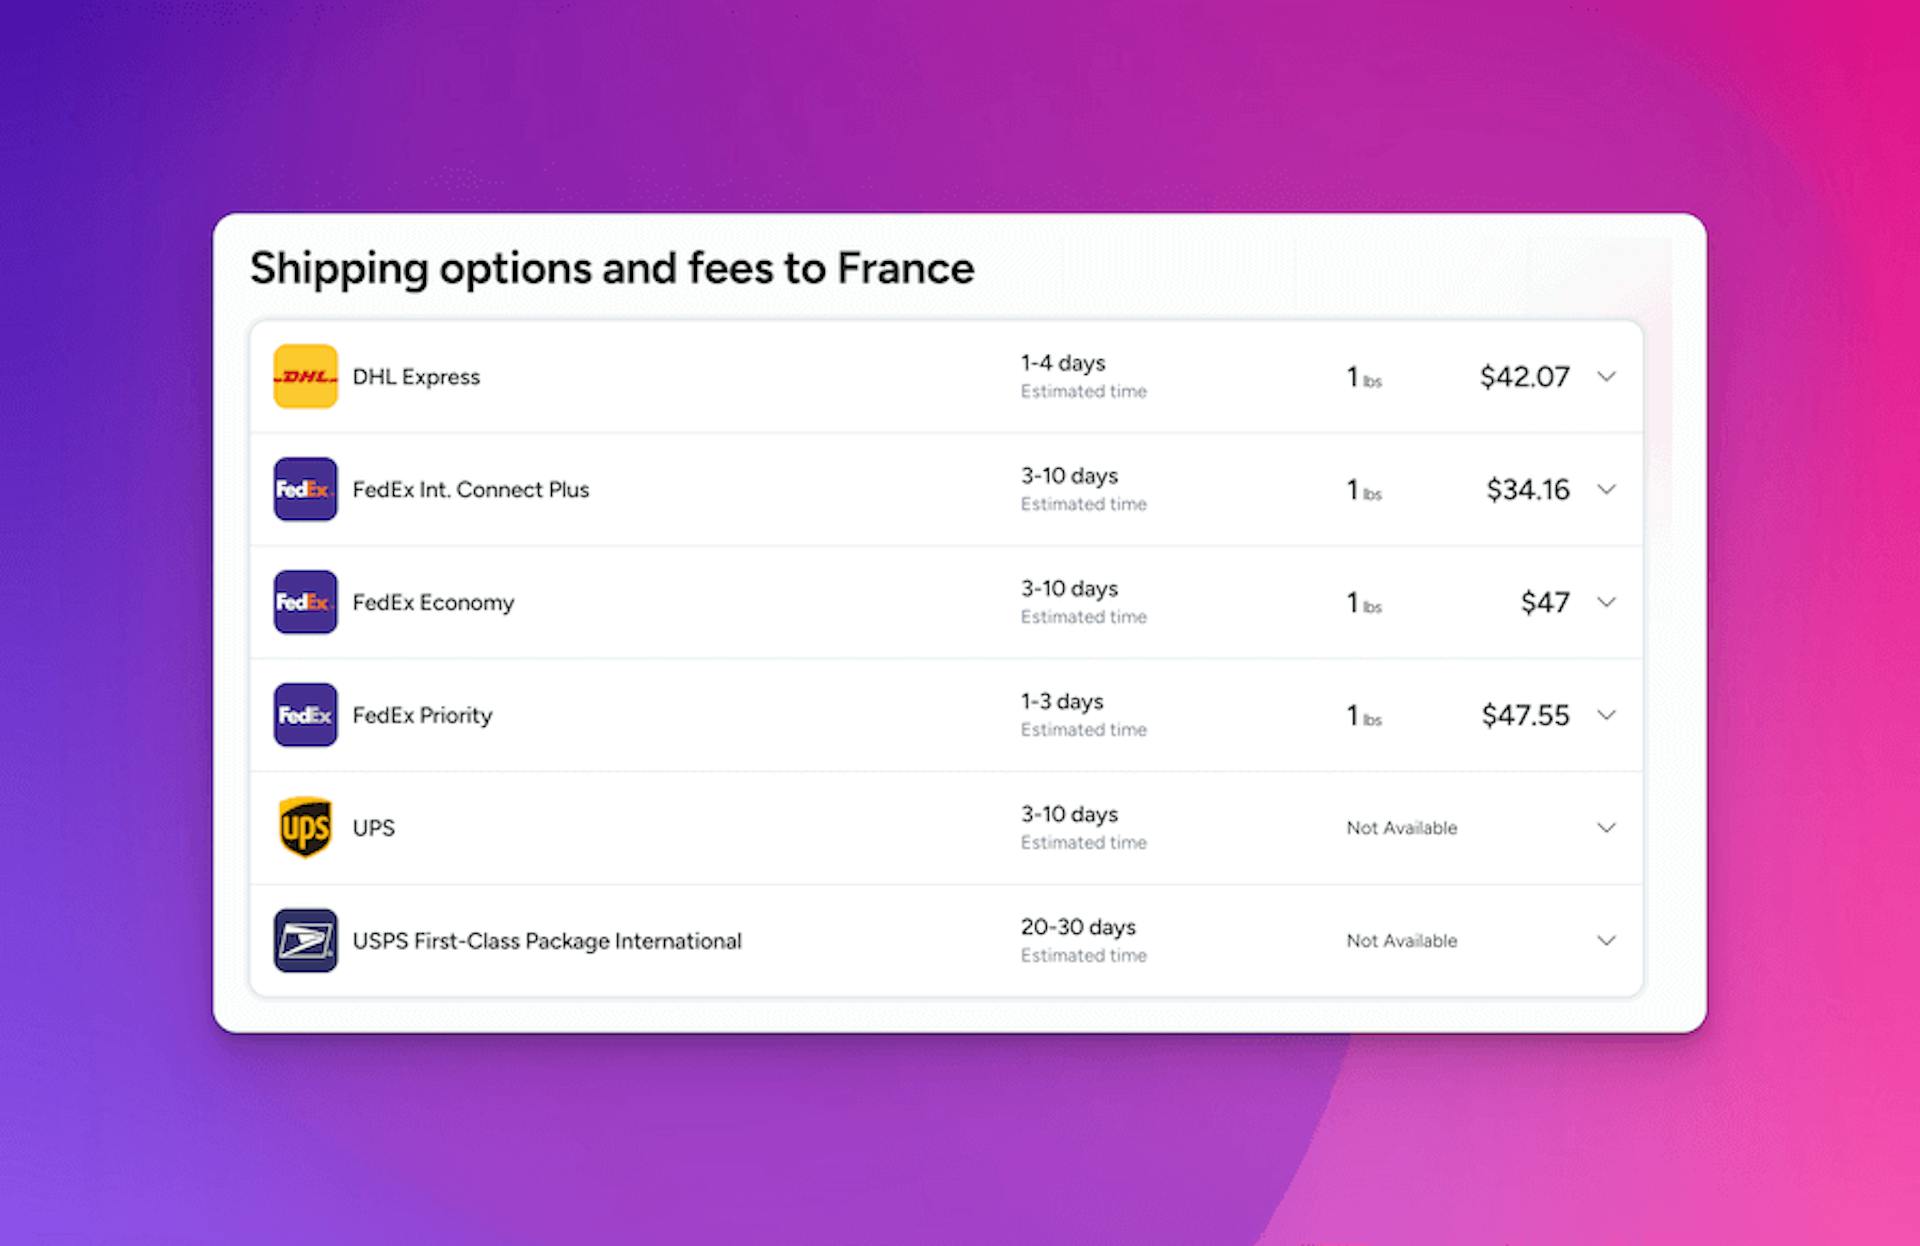 Shipping options and fees to France by FedEx, DHL Express, USPS, UPS